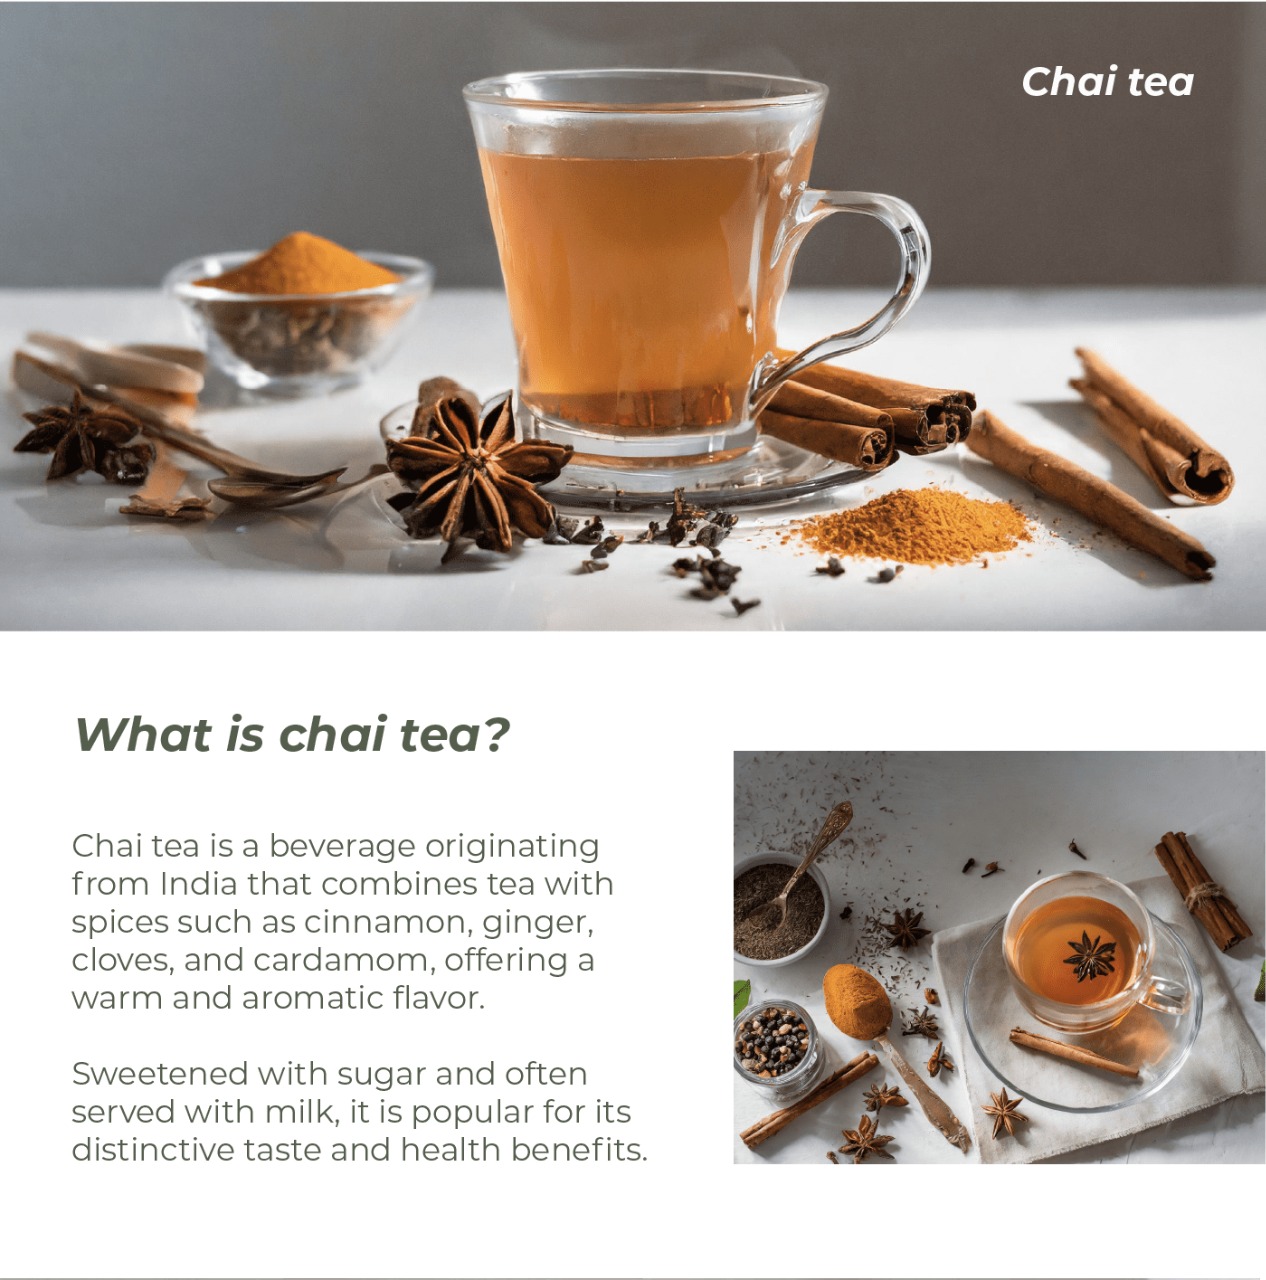 Chai tea is a beverage originating from India that combines tea with spices such as cinnamon, ginger, cloves, and cardamom, offering a warm and aromatic flavor.   Sweetened with sugar and often served with milk, it is popular for its distinctive taste and health benefits